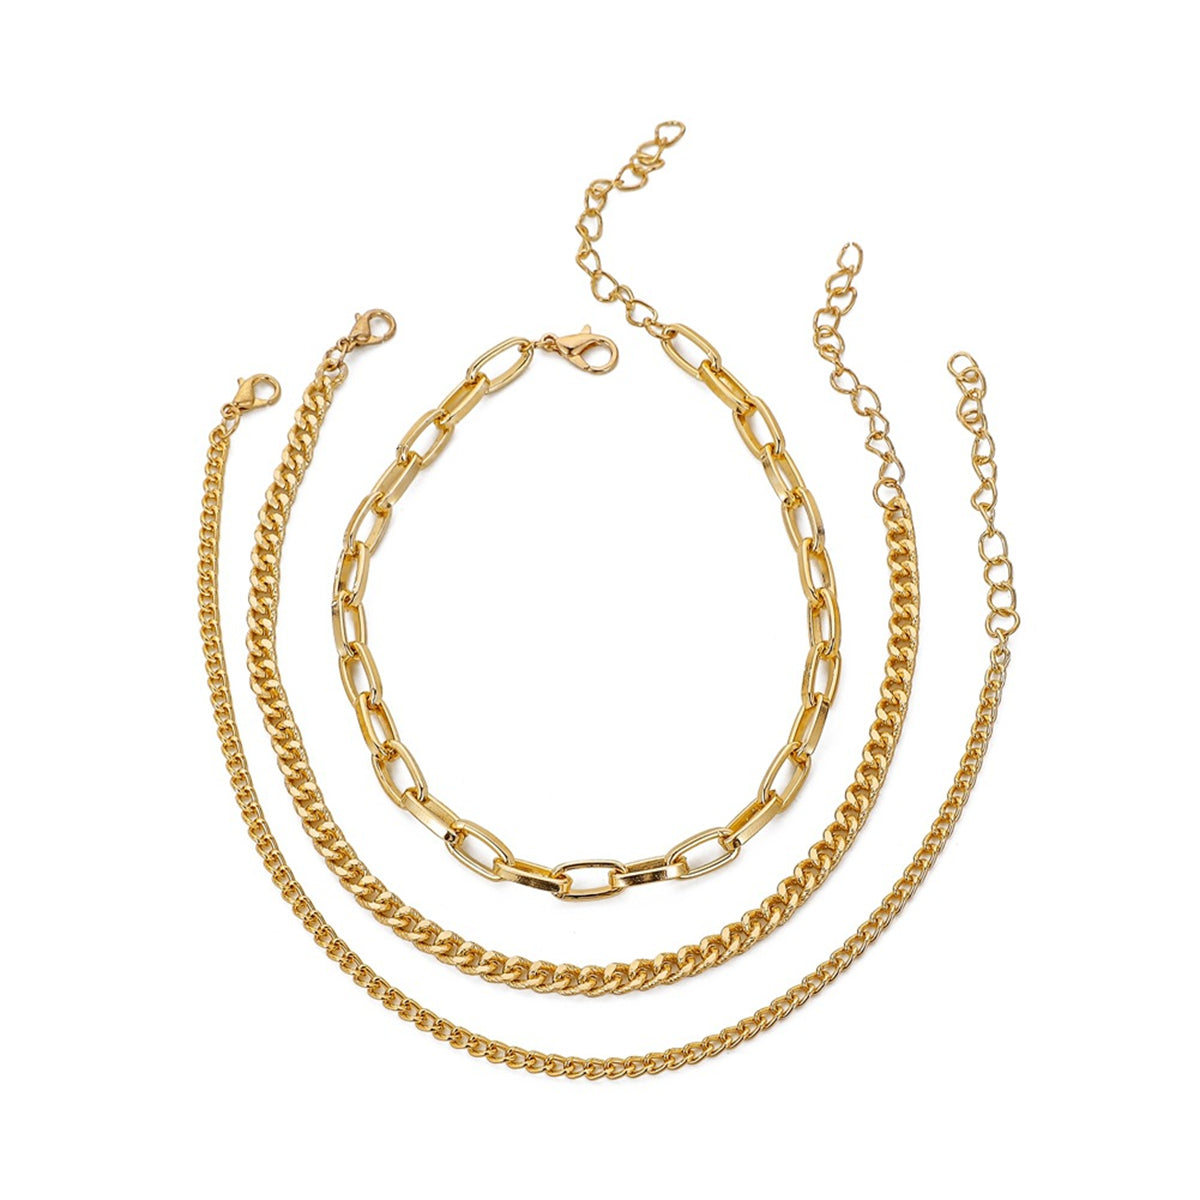 18K Gold-Plated Curb Chain Anklet Set